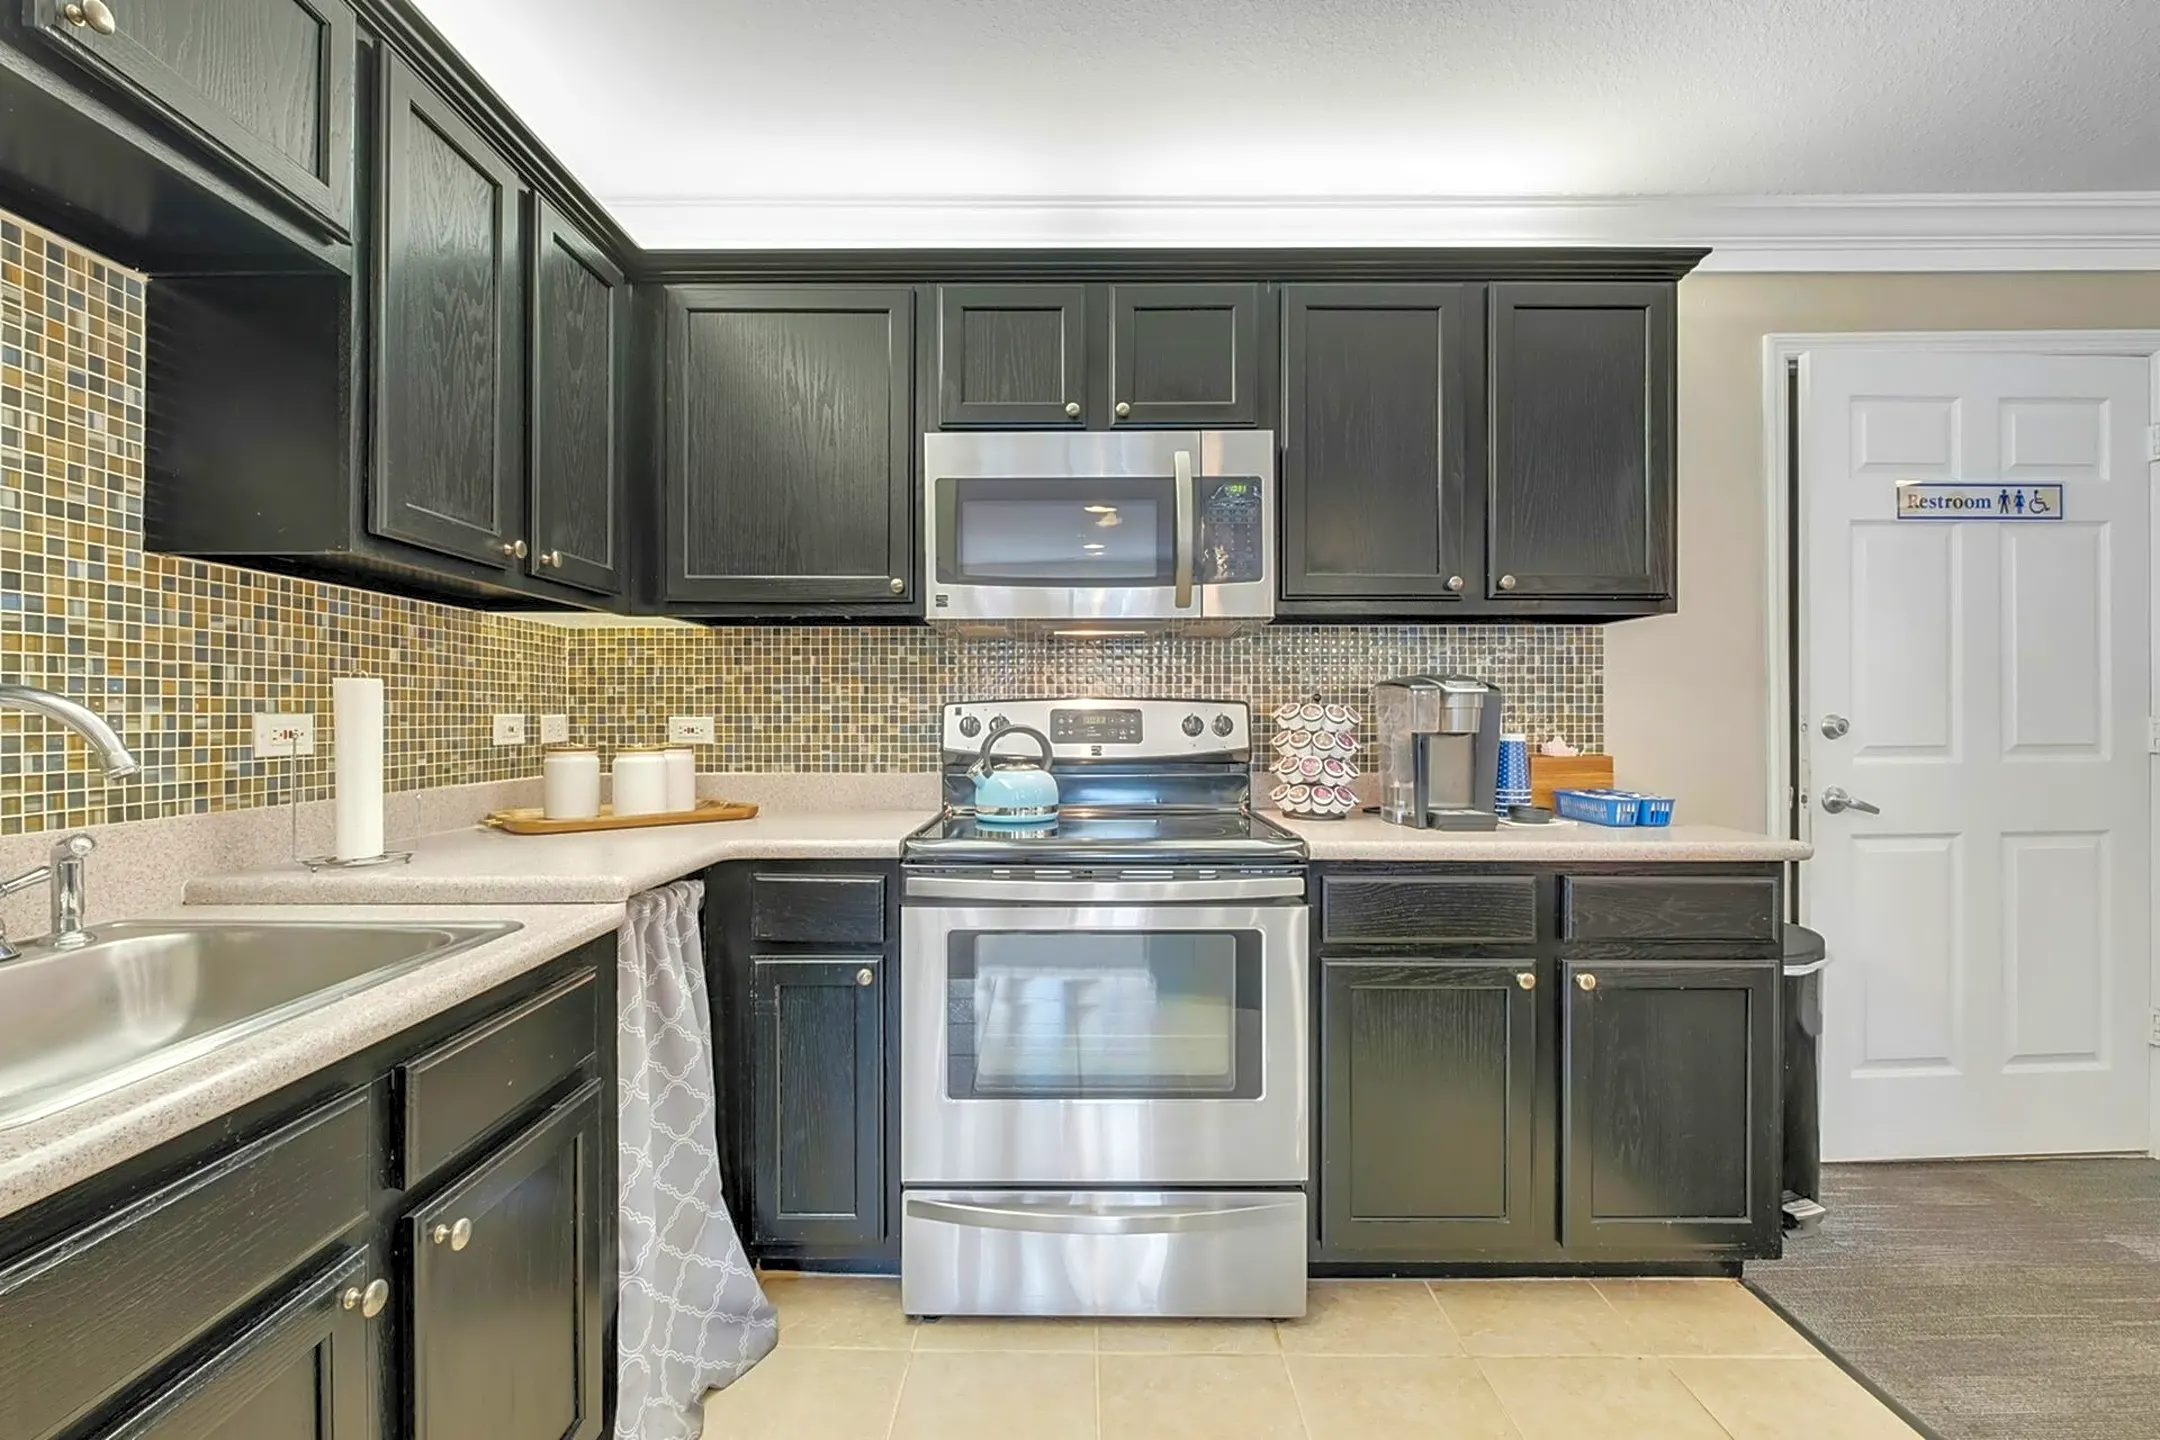 Kitchen - The Landing at Appleyard - Per Bed Lease - Tallahassee, FL